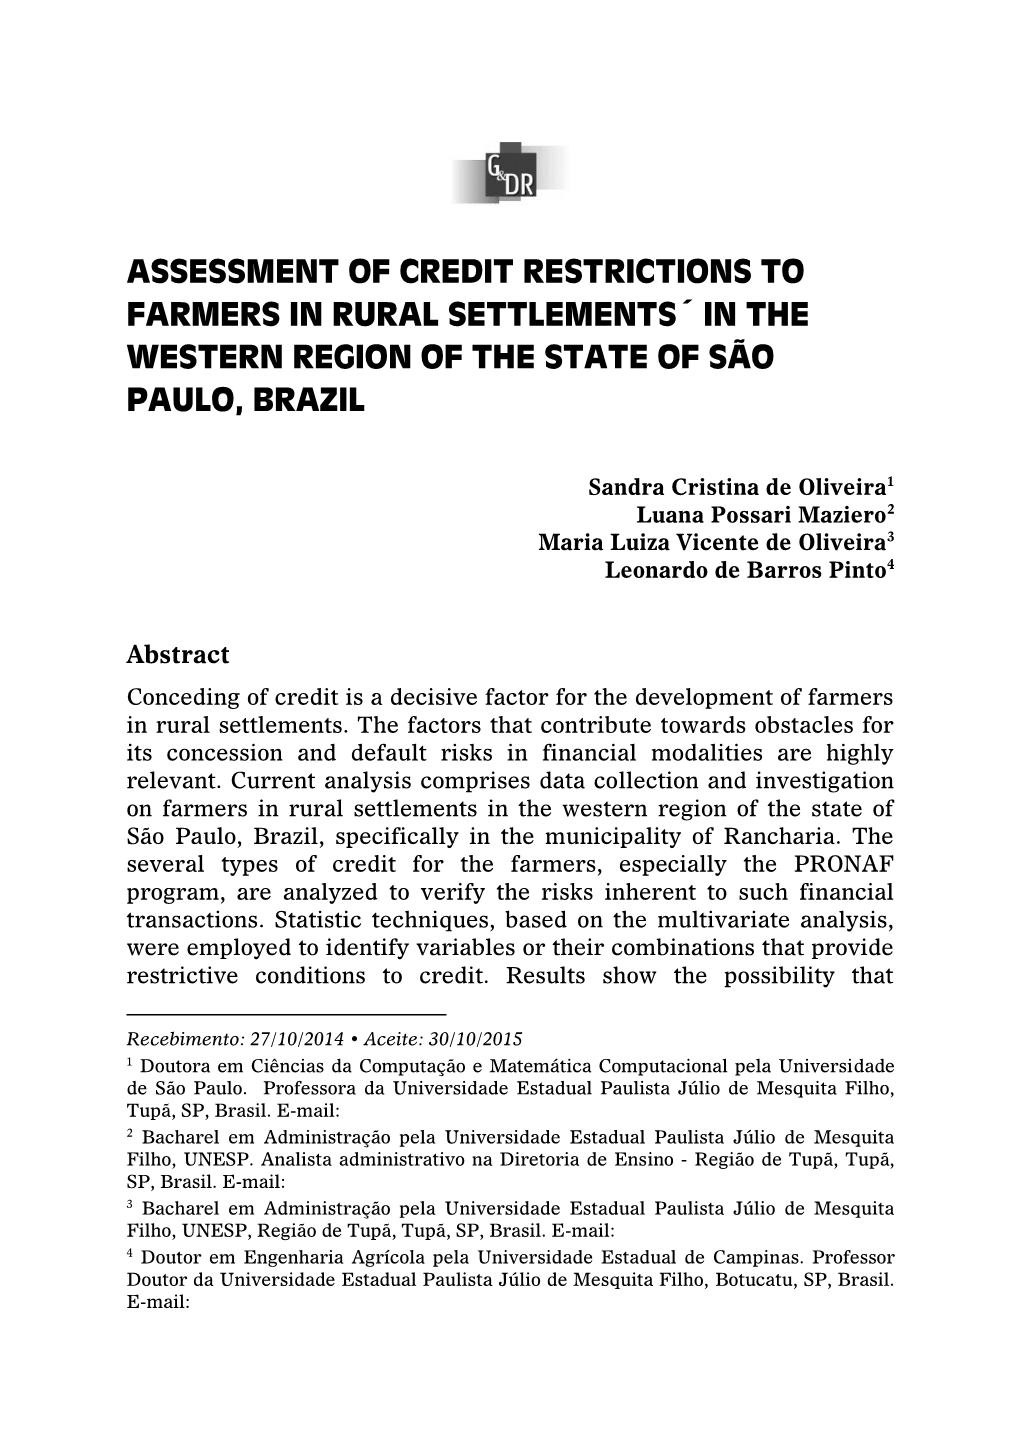 Assessment of Credit Restrictions to Farmers in Rural Settlements´ in the Western Region of the State of São Paulo, Brazil